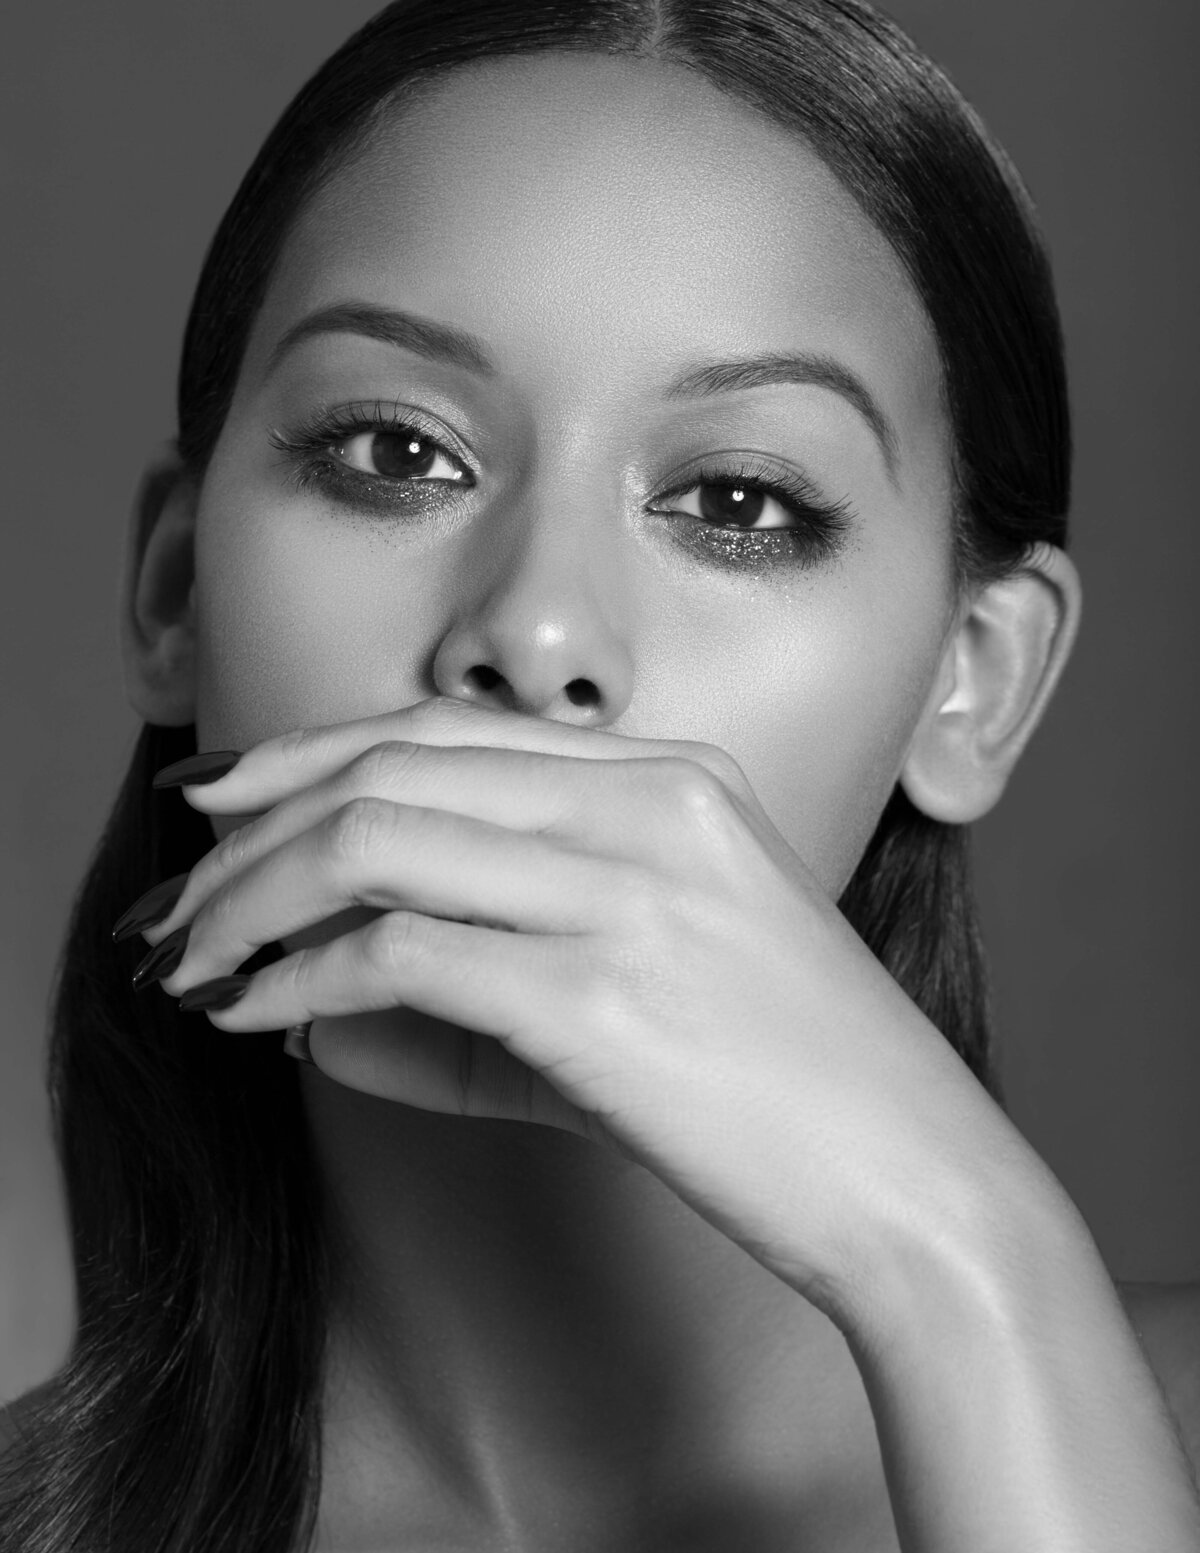 Beauty portrait of this stunning woman covering her mouth